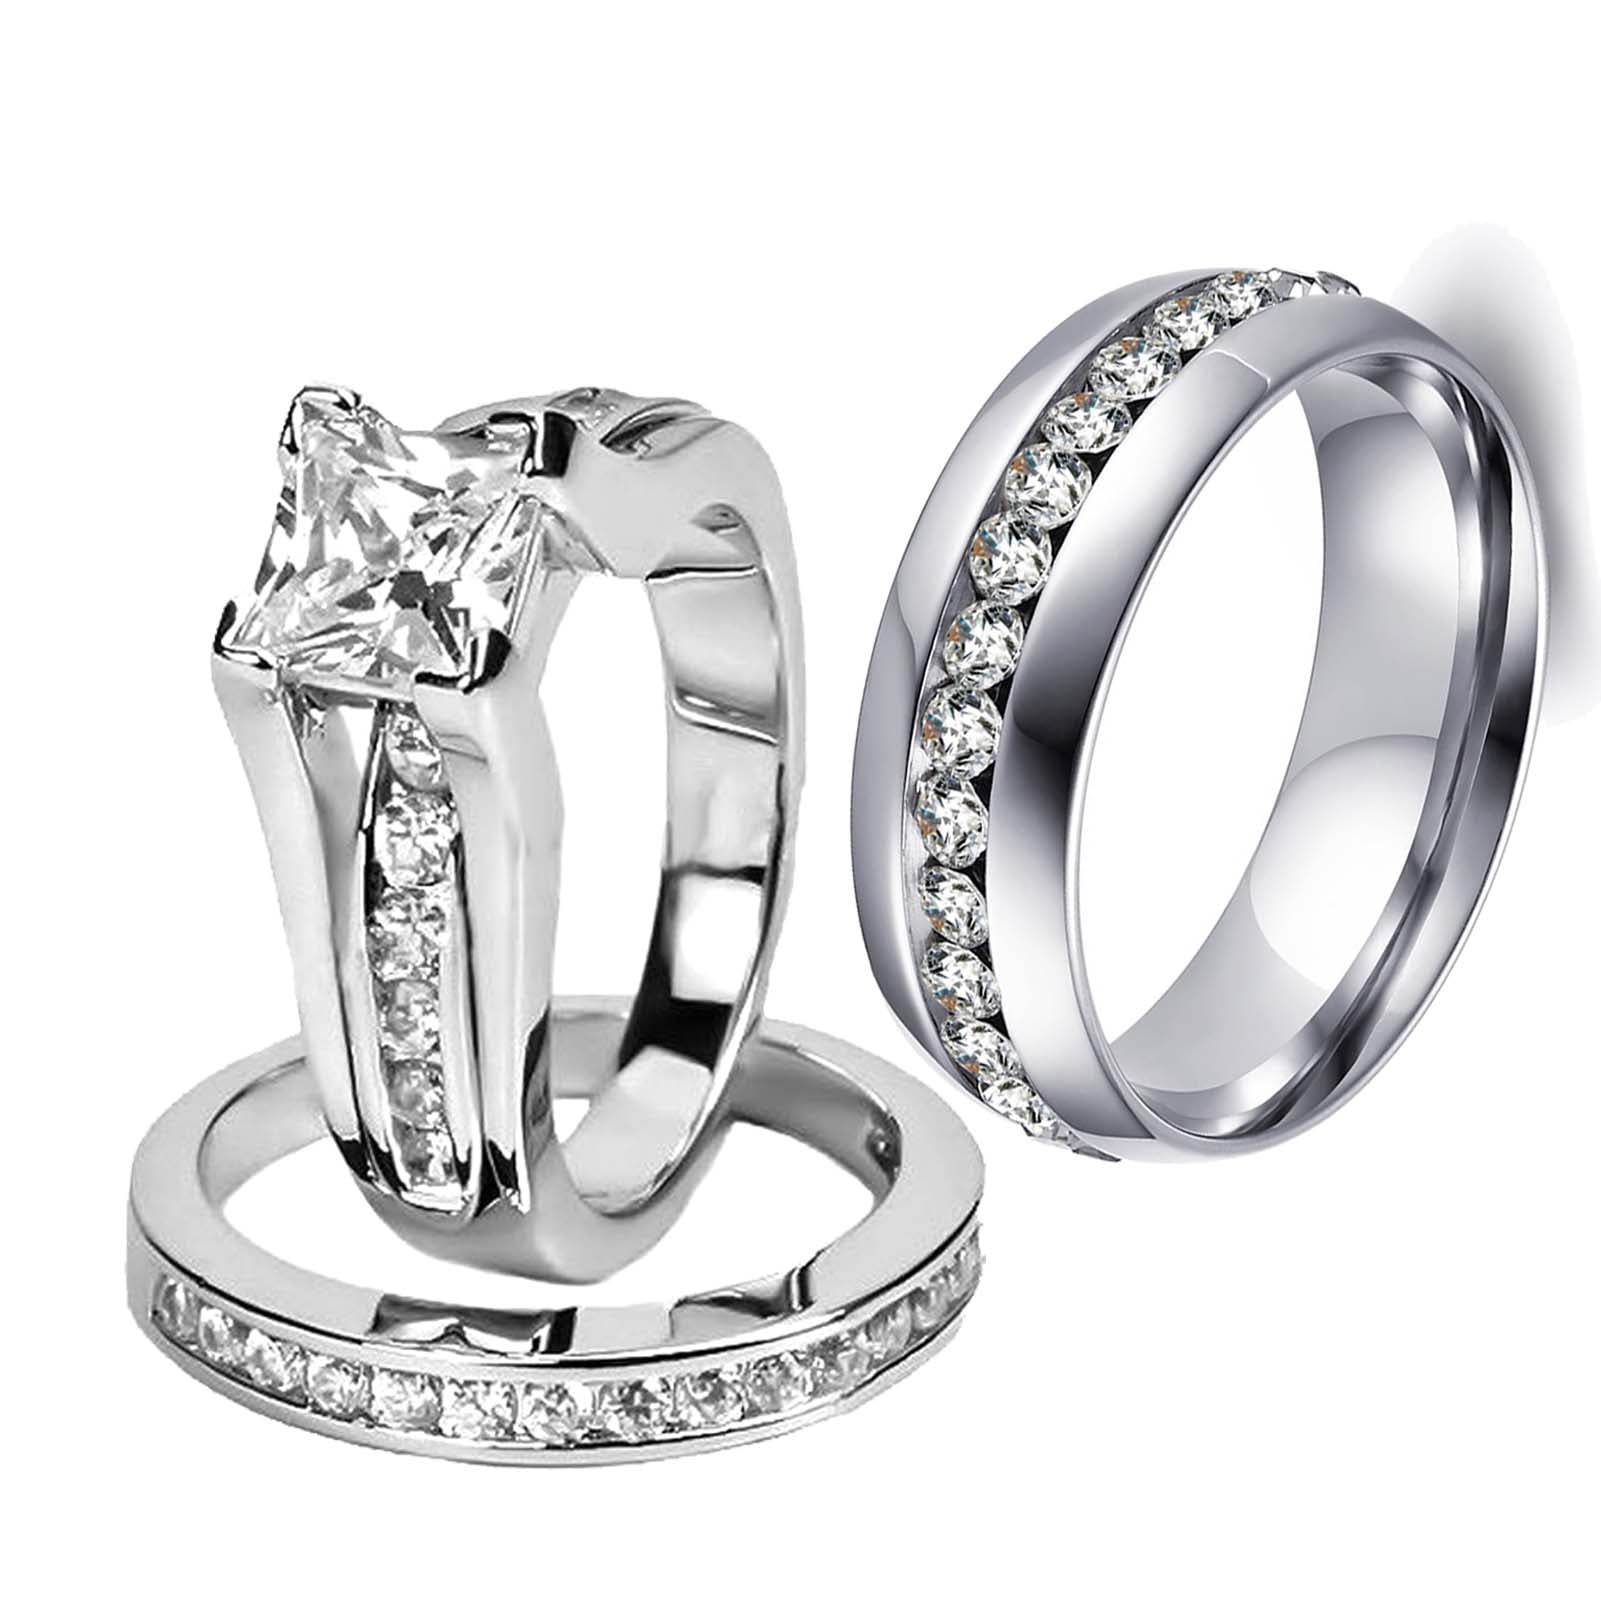 ringheart Matching Rings His and Her Rings Couple Rings Princess cut ...